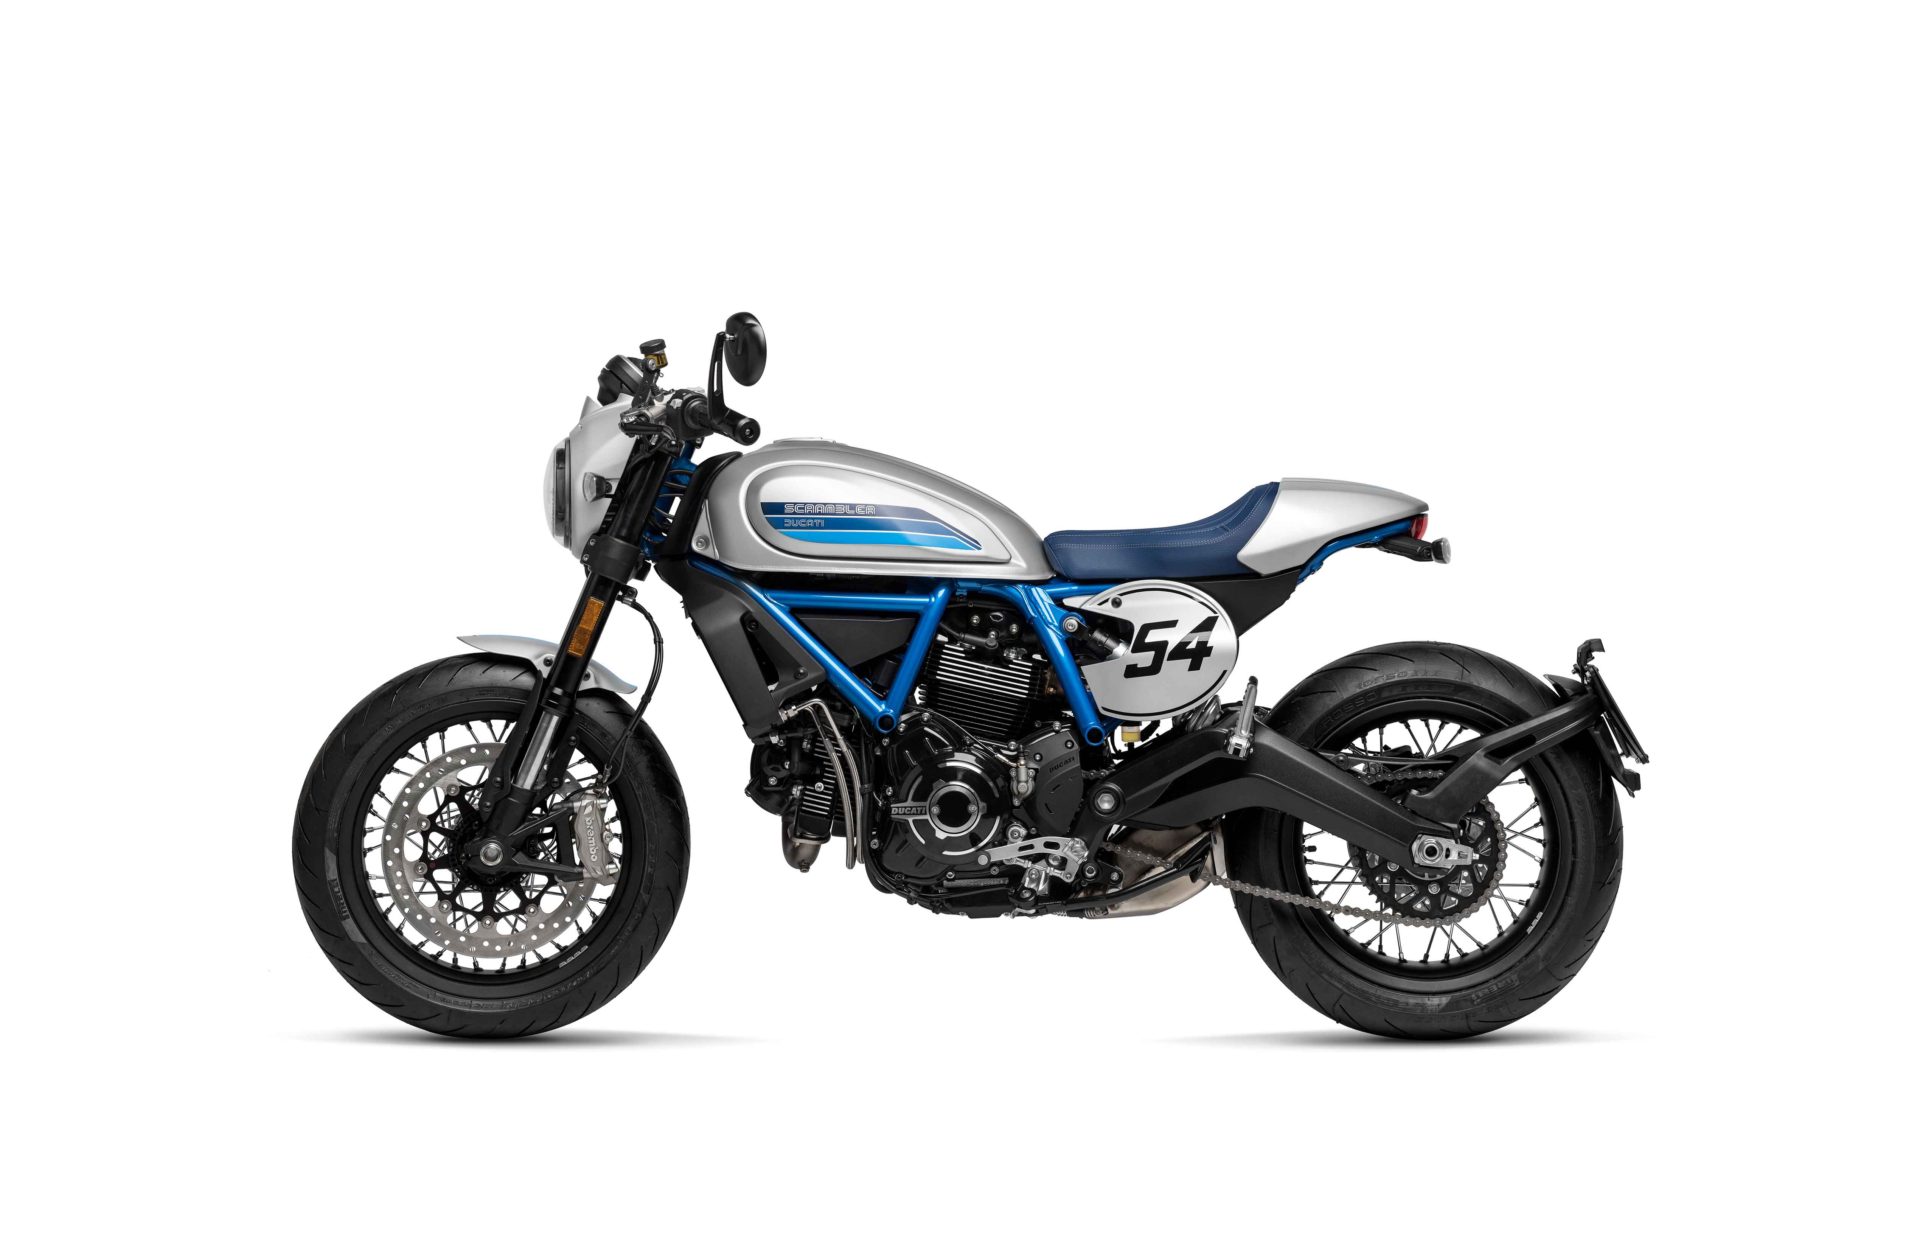 Silver and blue Ducati Scrambler cafe racer motorcycle on white background